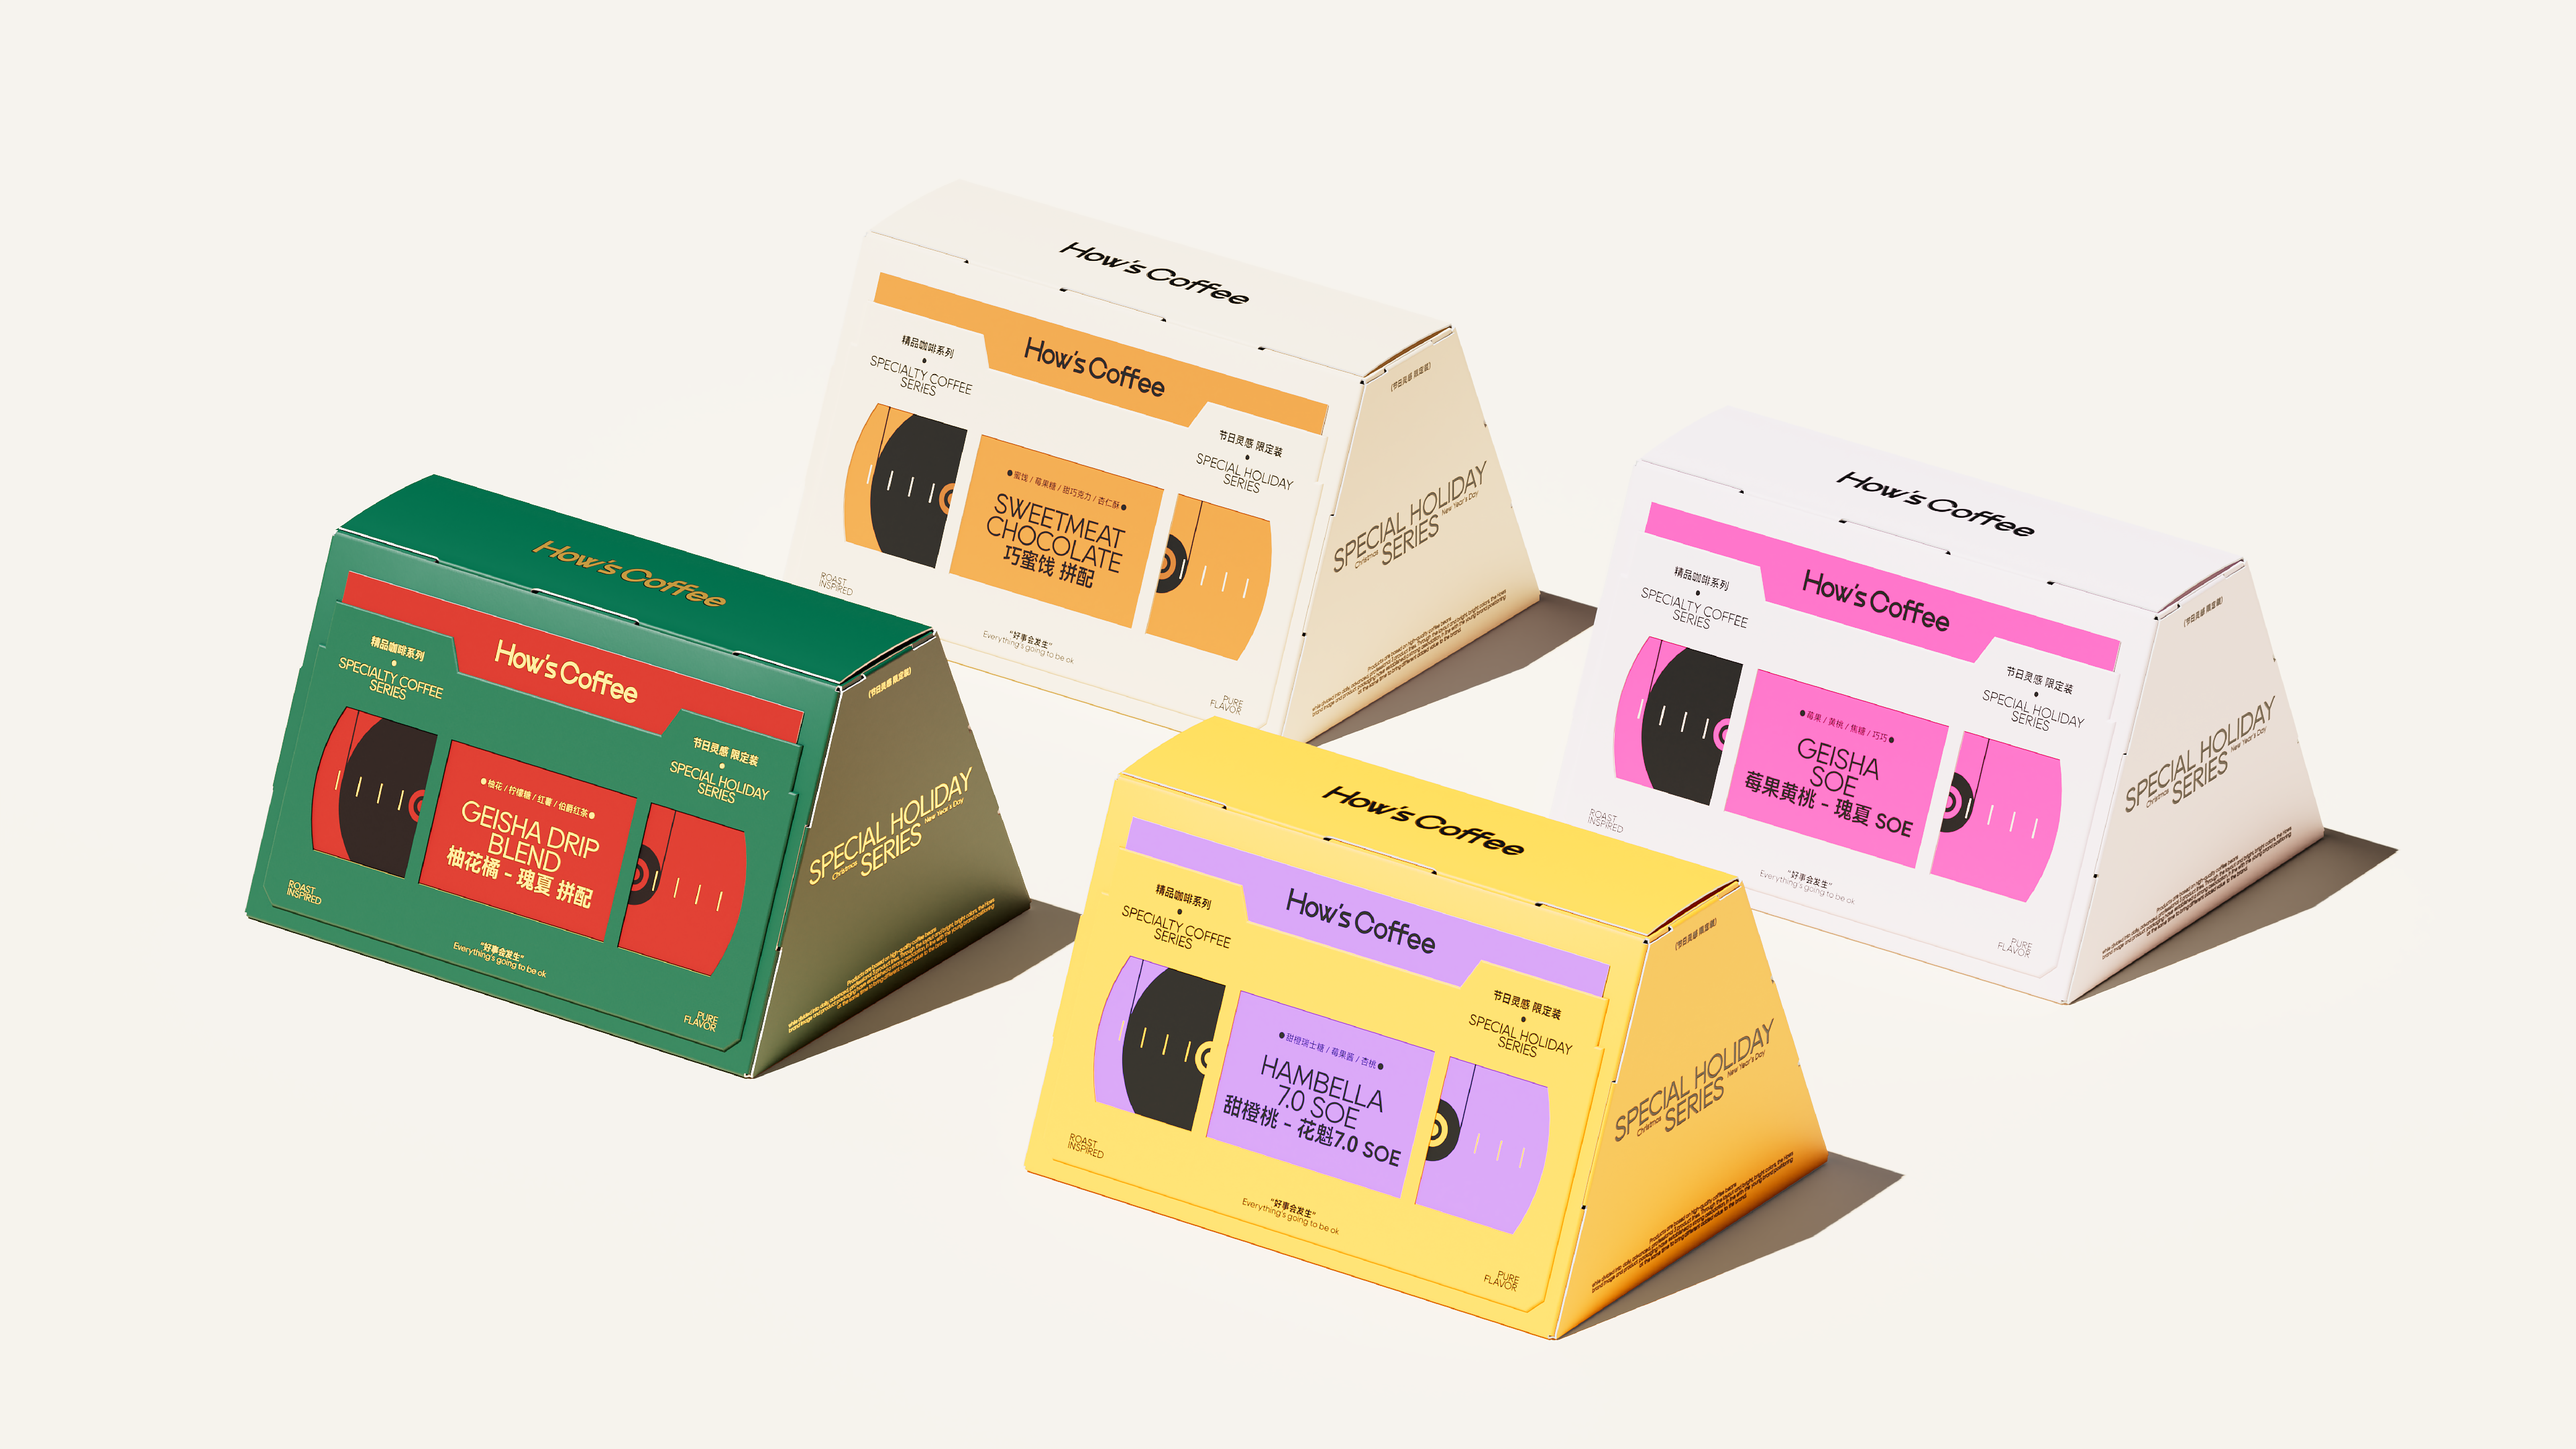 Analog Music Lovers Will Adore This Special Mixtape-Inspired Packaging from How’s Coffee